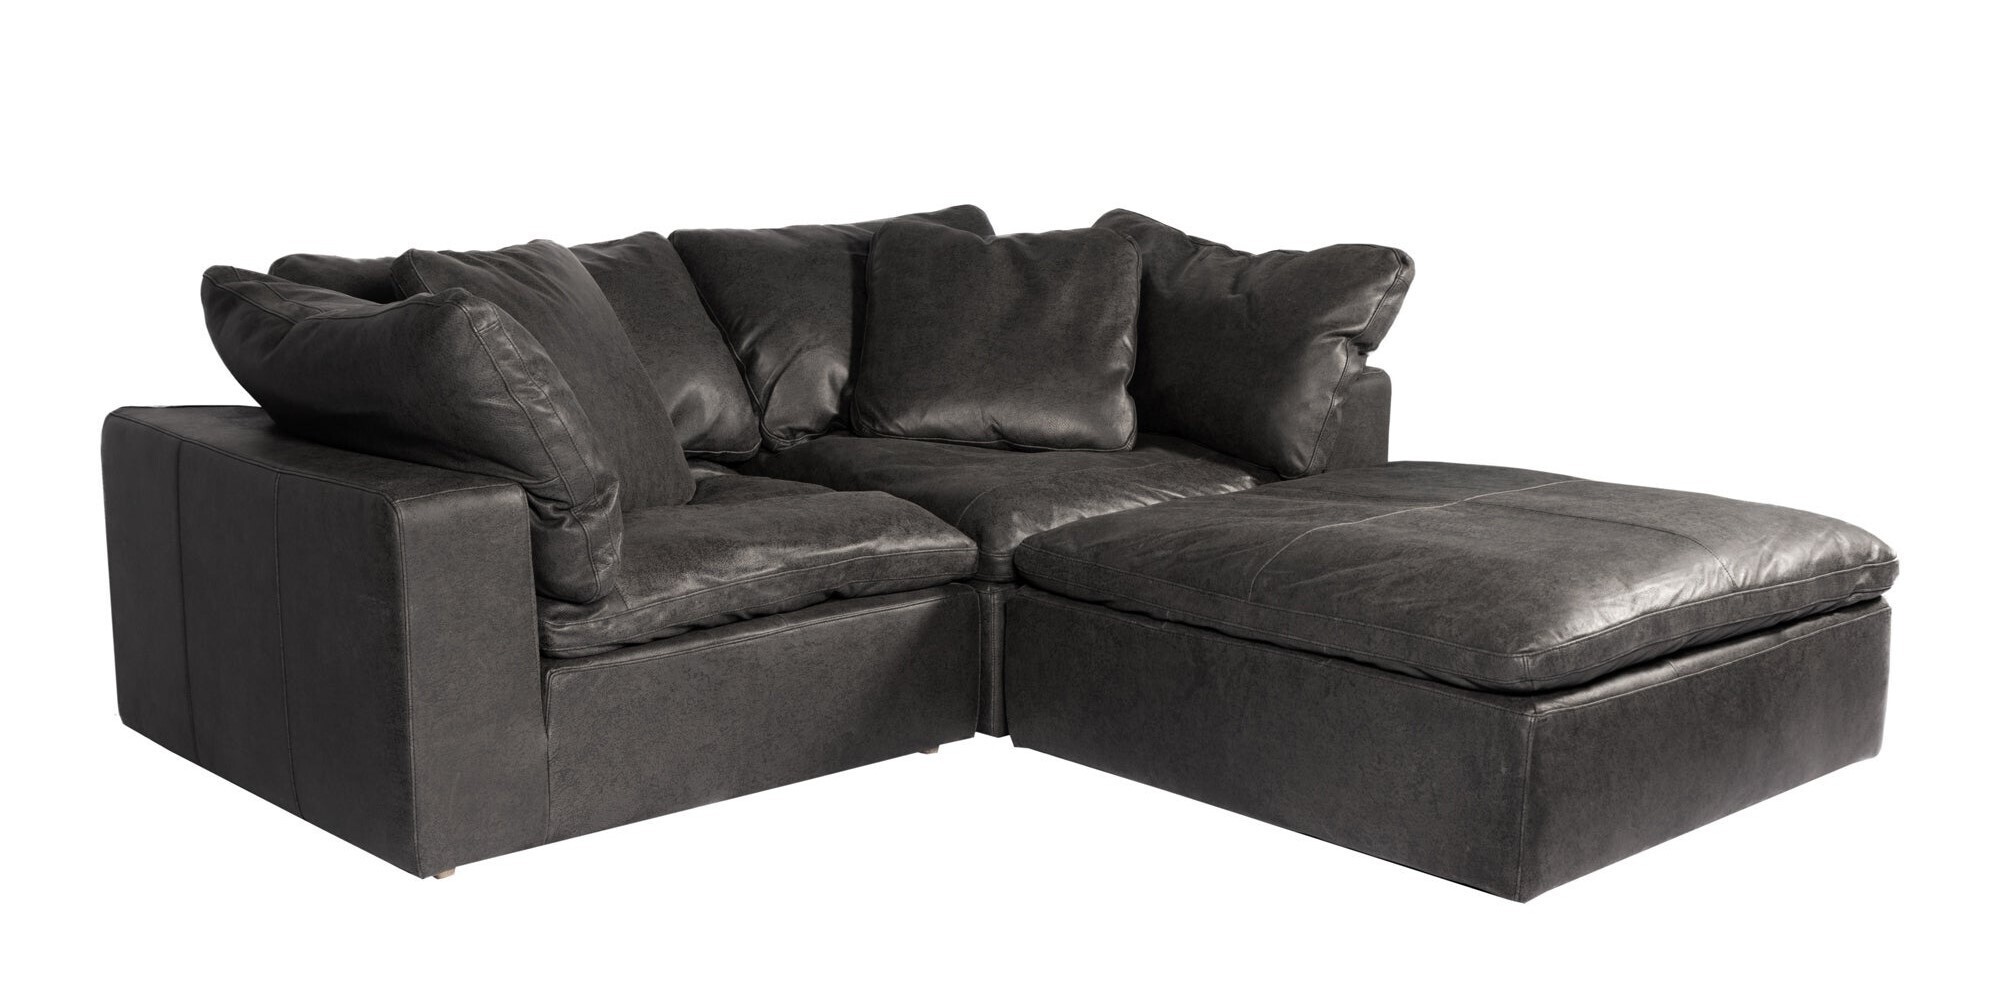 Modular Styled Small Leather Sectionals